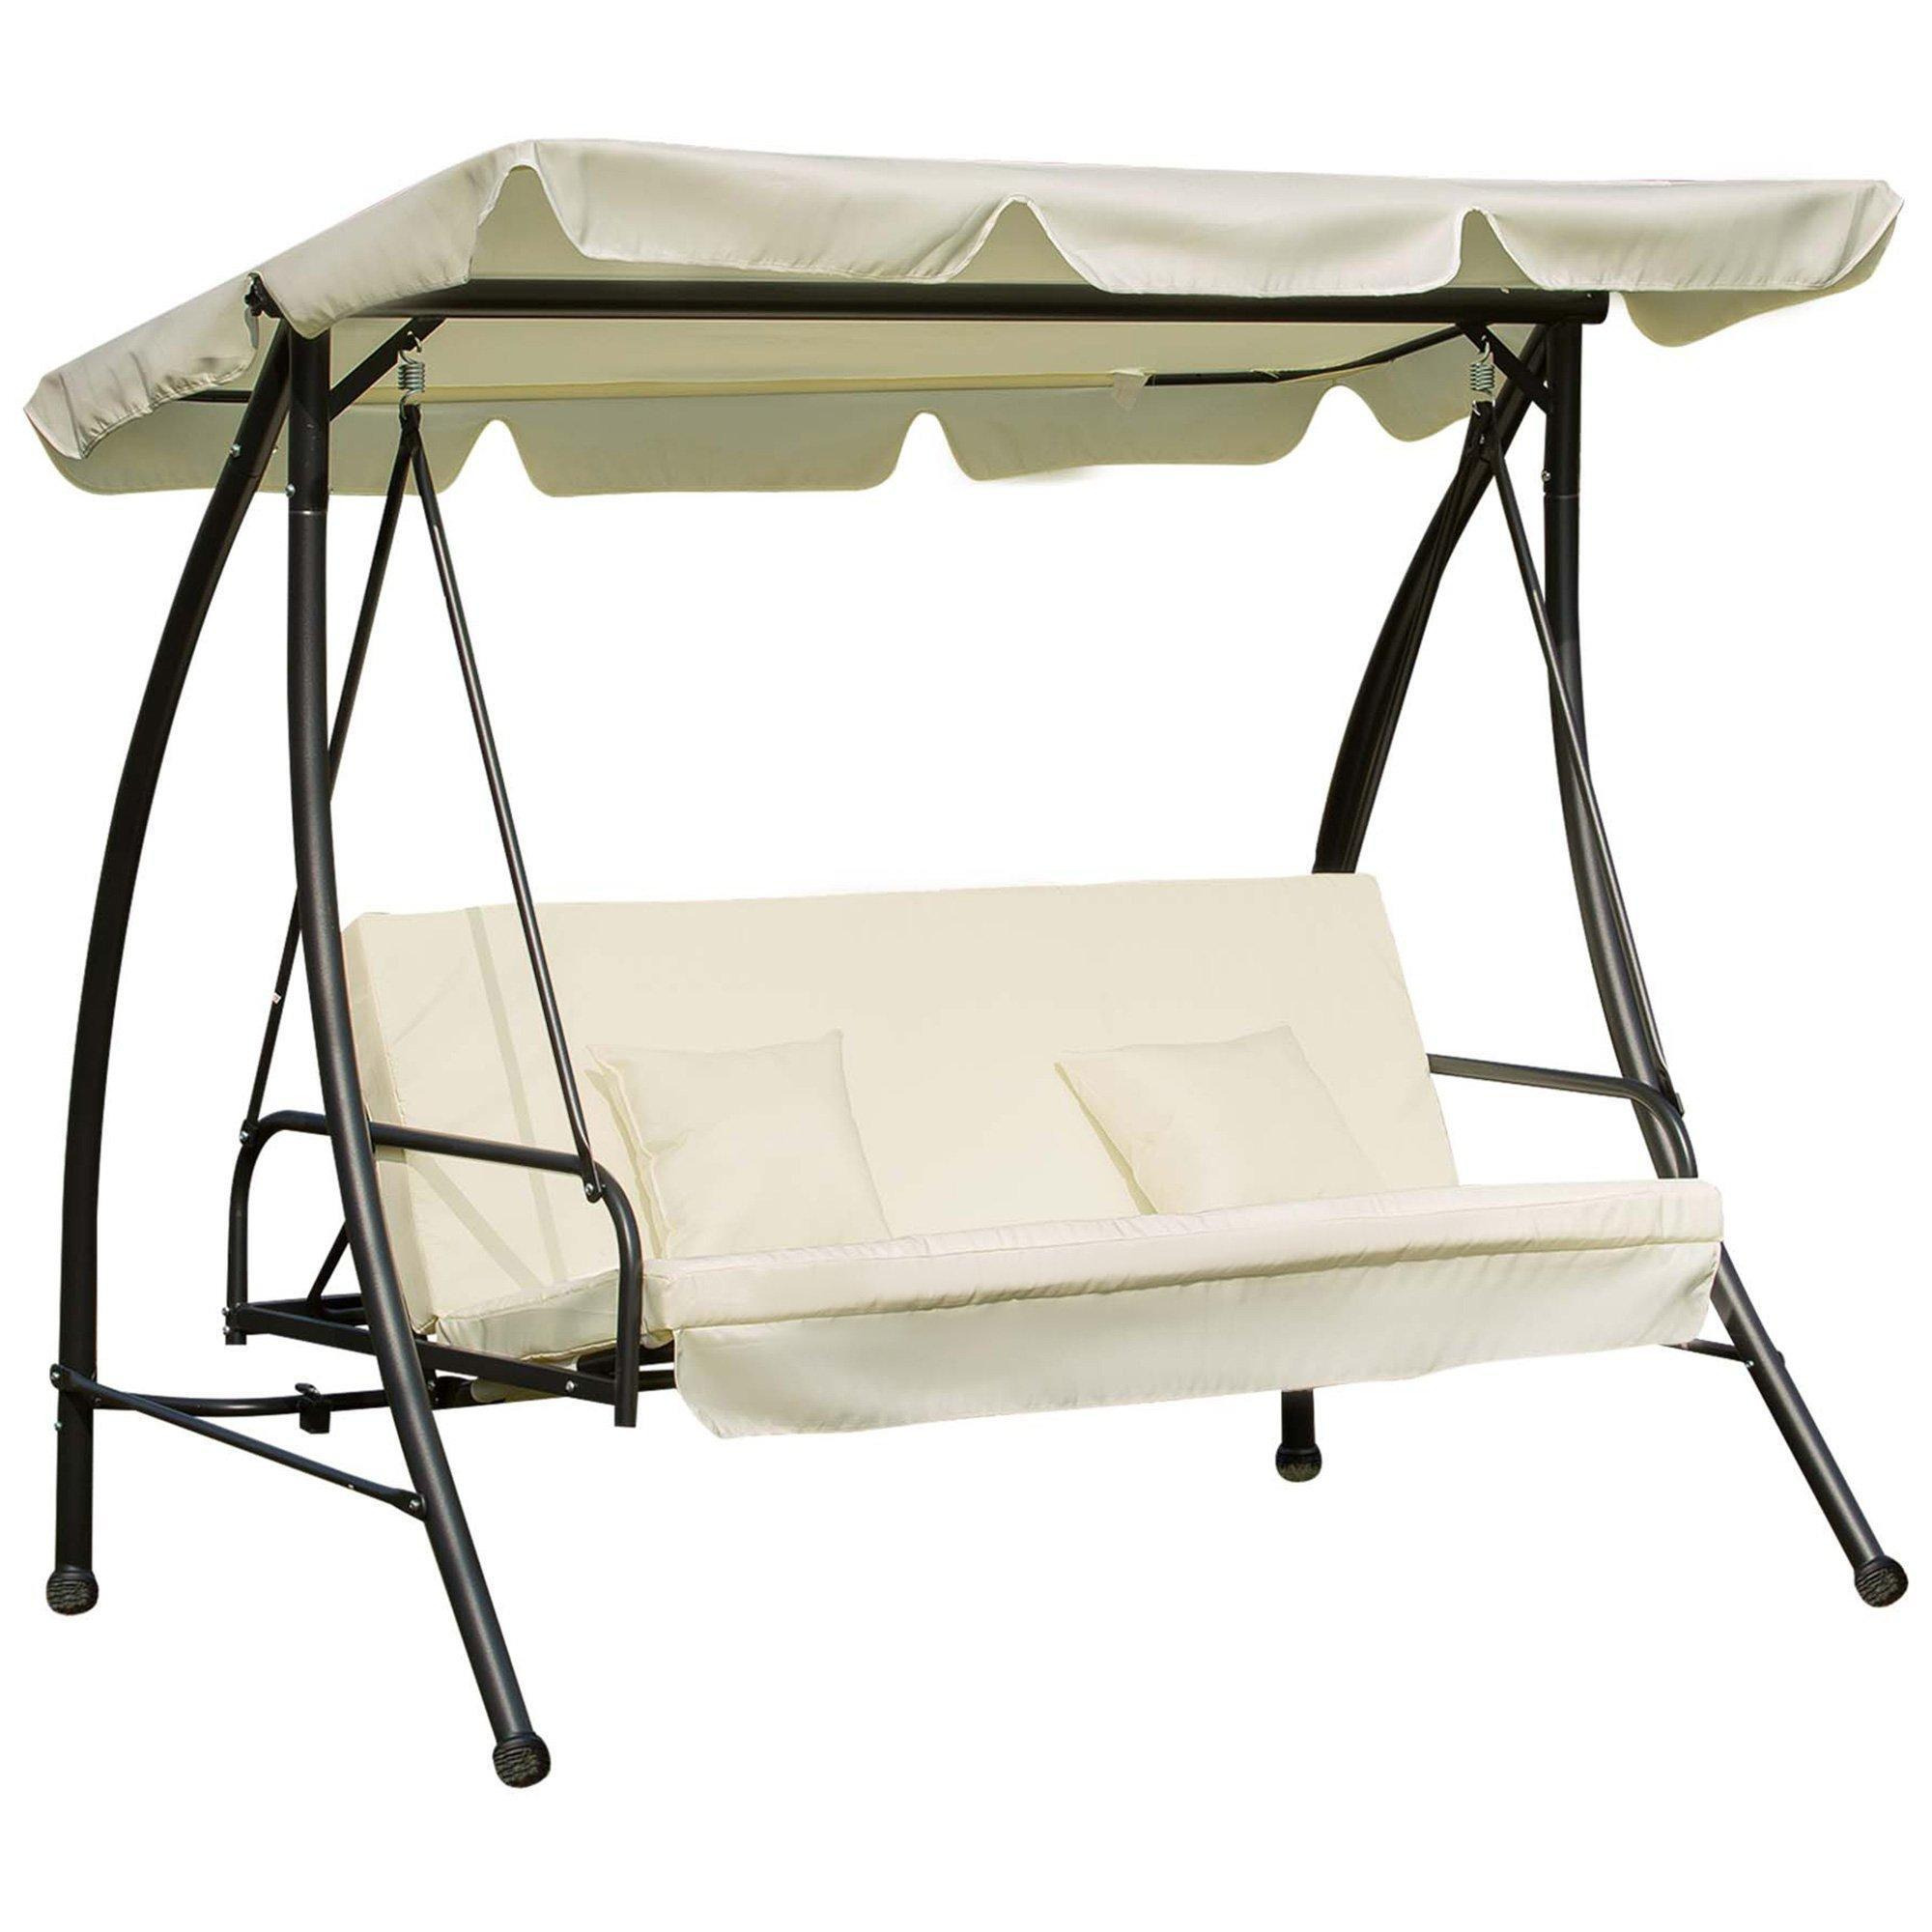 2-in-1 Garden Swing Chair for 3 Person with Tilting Canopy - image 1